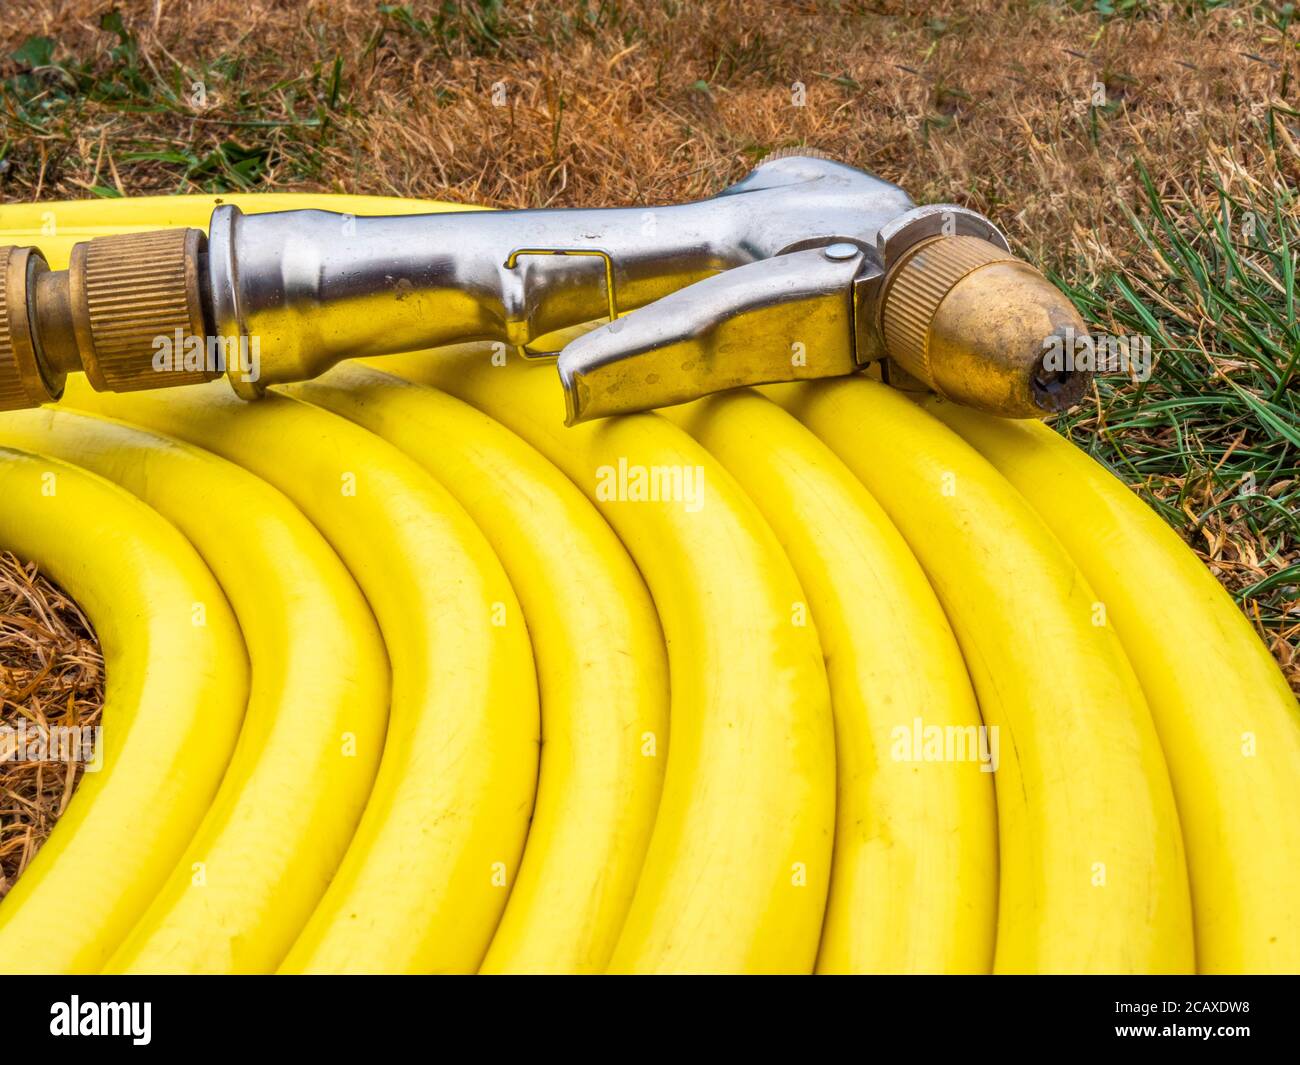 An unbranded yellow coiled water hose, with attached spray gun, on parched brown grass in an area where a water shortage has led to a hosepipe ban. Stock Photo